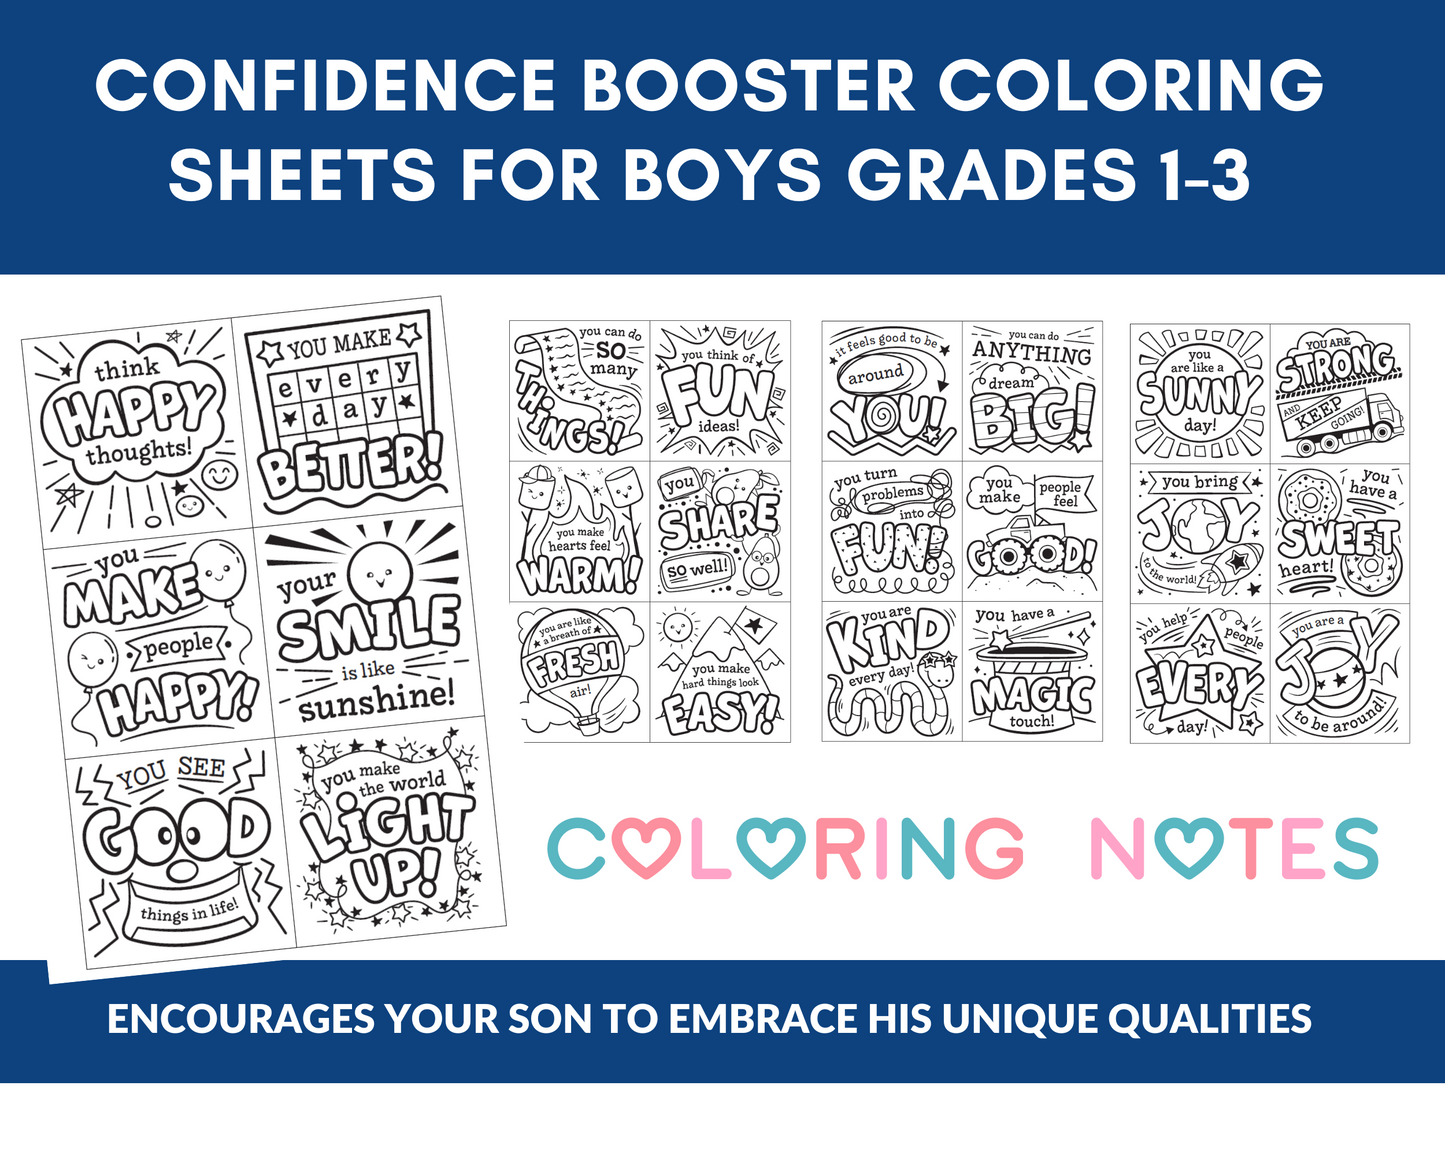 Confidence Booster Coloring Sheets for Boys (Grades 1-3) Digital Download